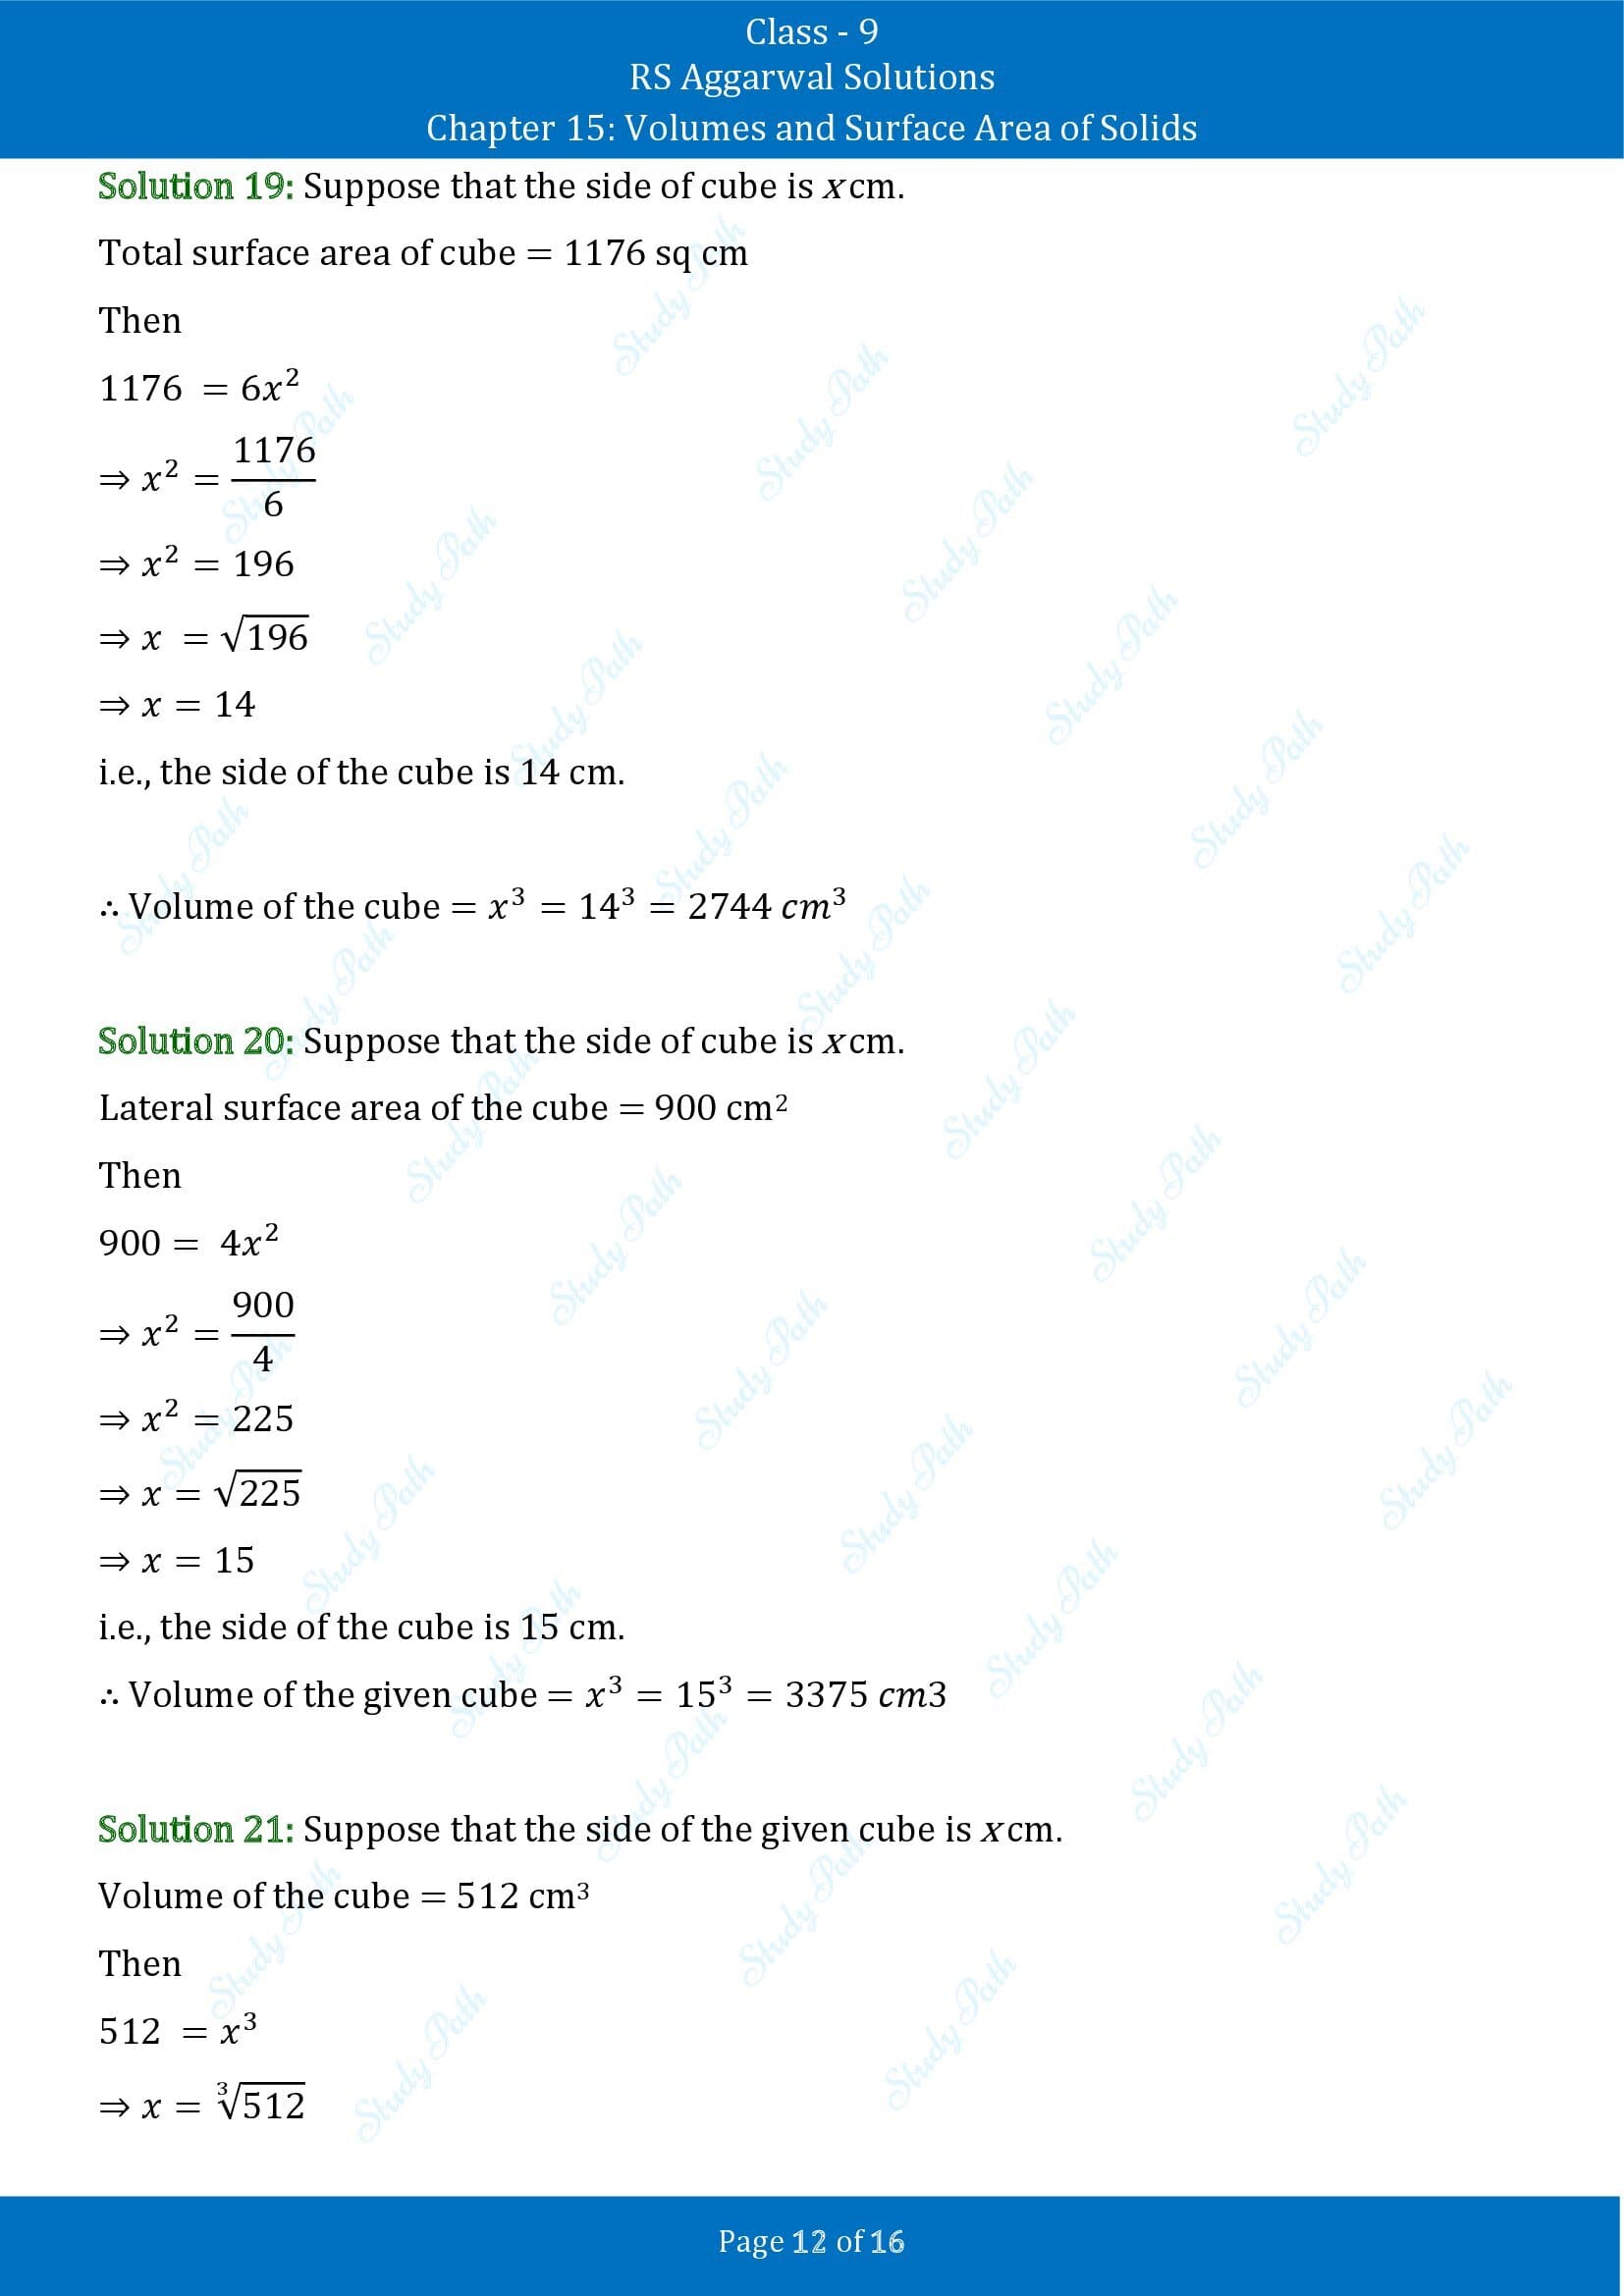 RS Aggarwal Solutions Class 9 Chapter 15 Volumes and Surface Area of Solids Exercise 15A 00012